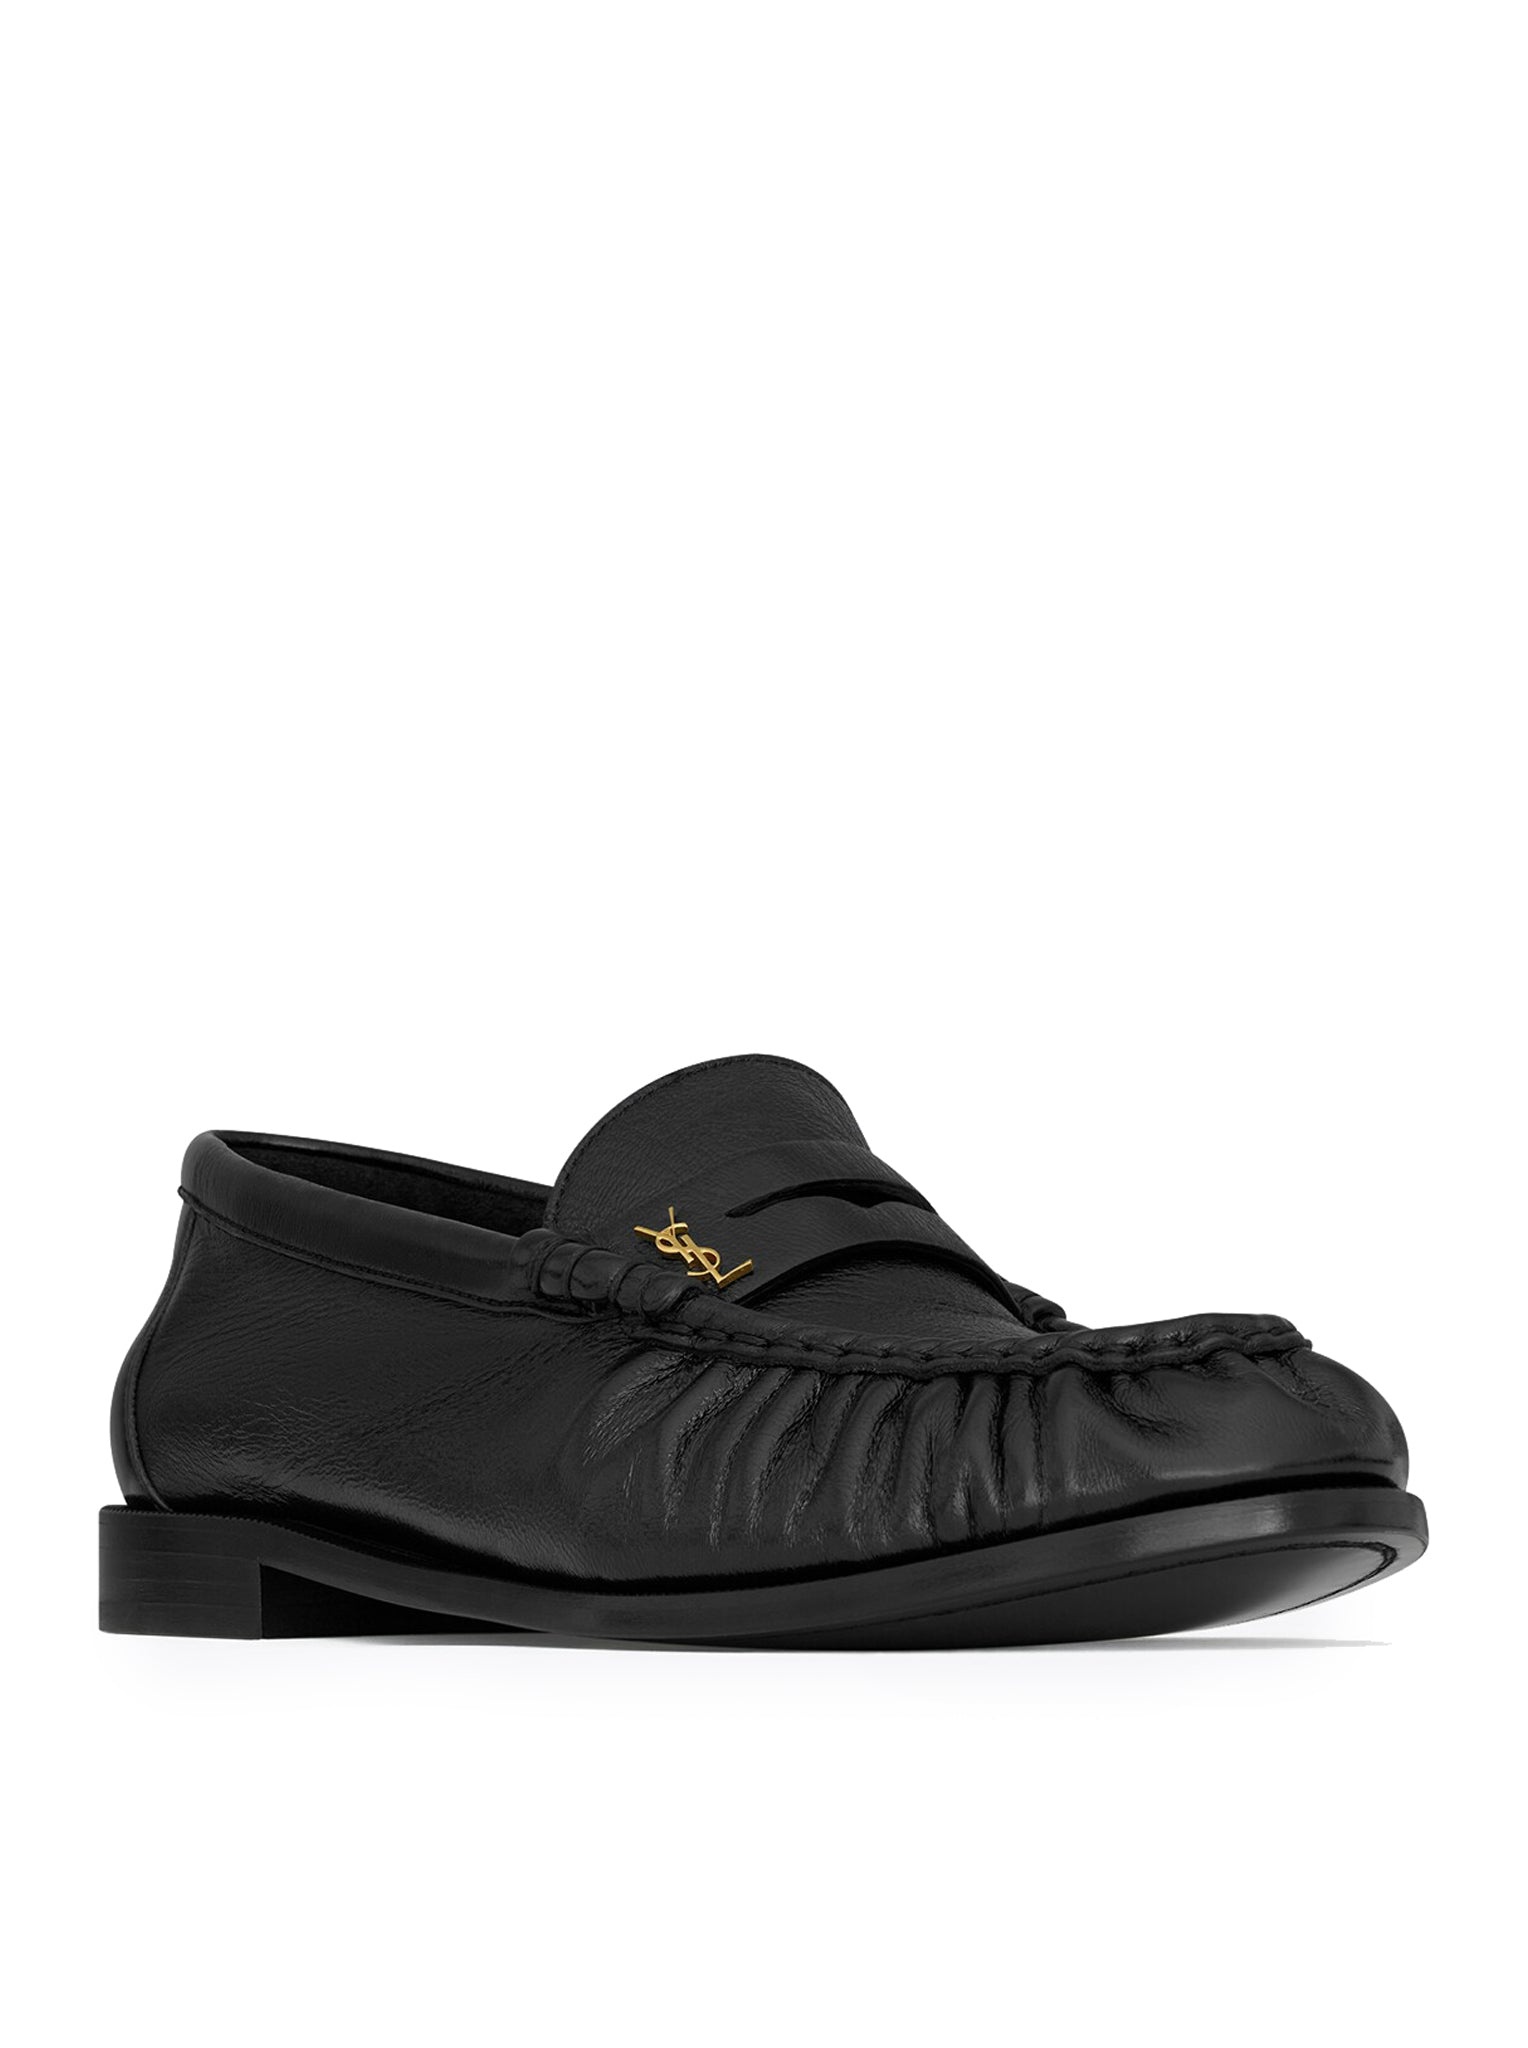 LE LOAFER LOAFERS IN POLISHED WRINKLED LEATHER - 2